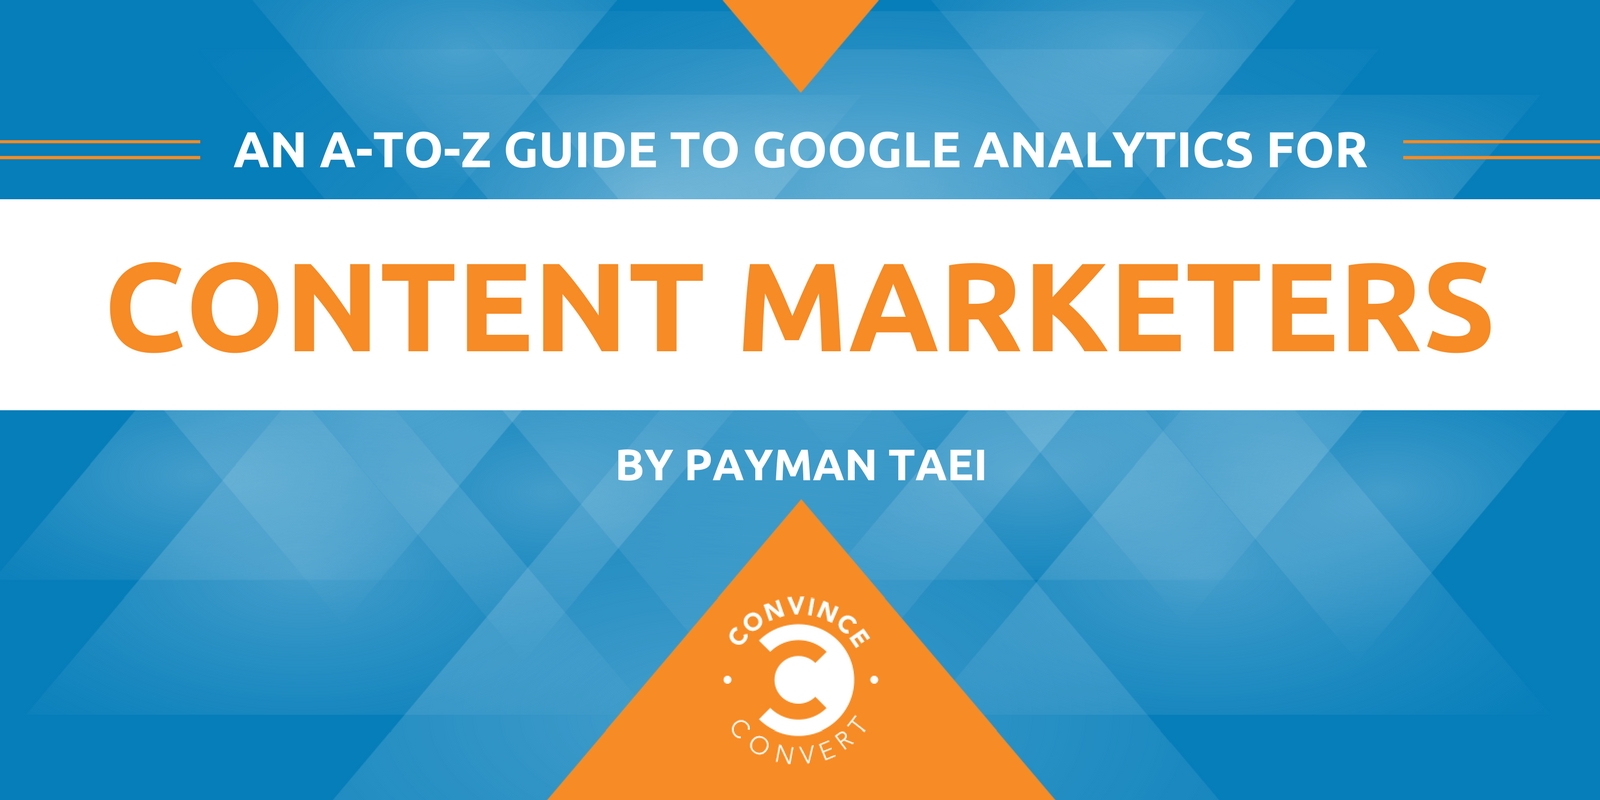 An A-to-Z Guide to Google Analytics for Content Marketers1